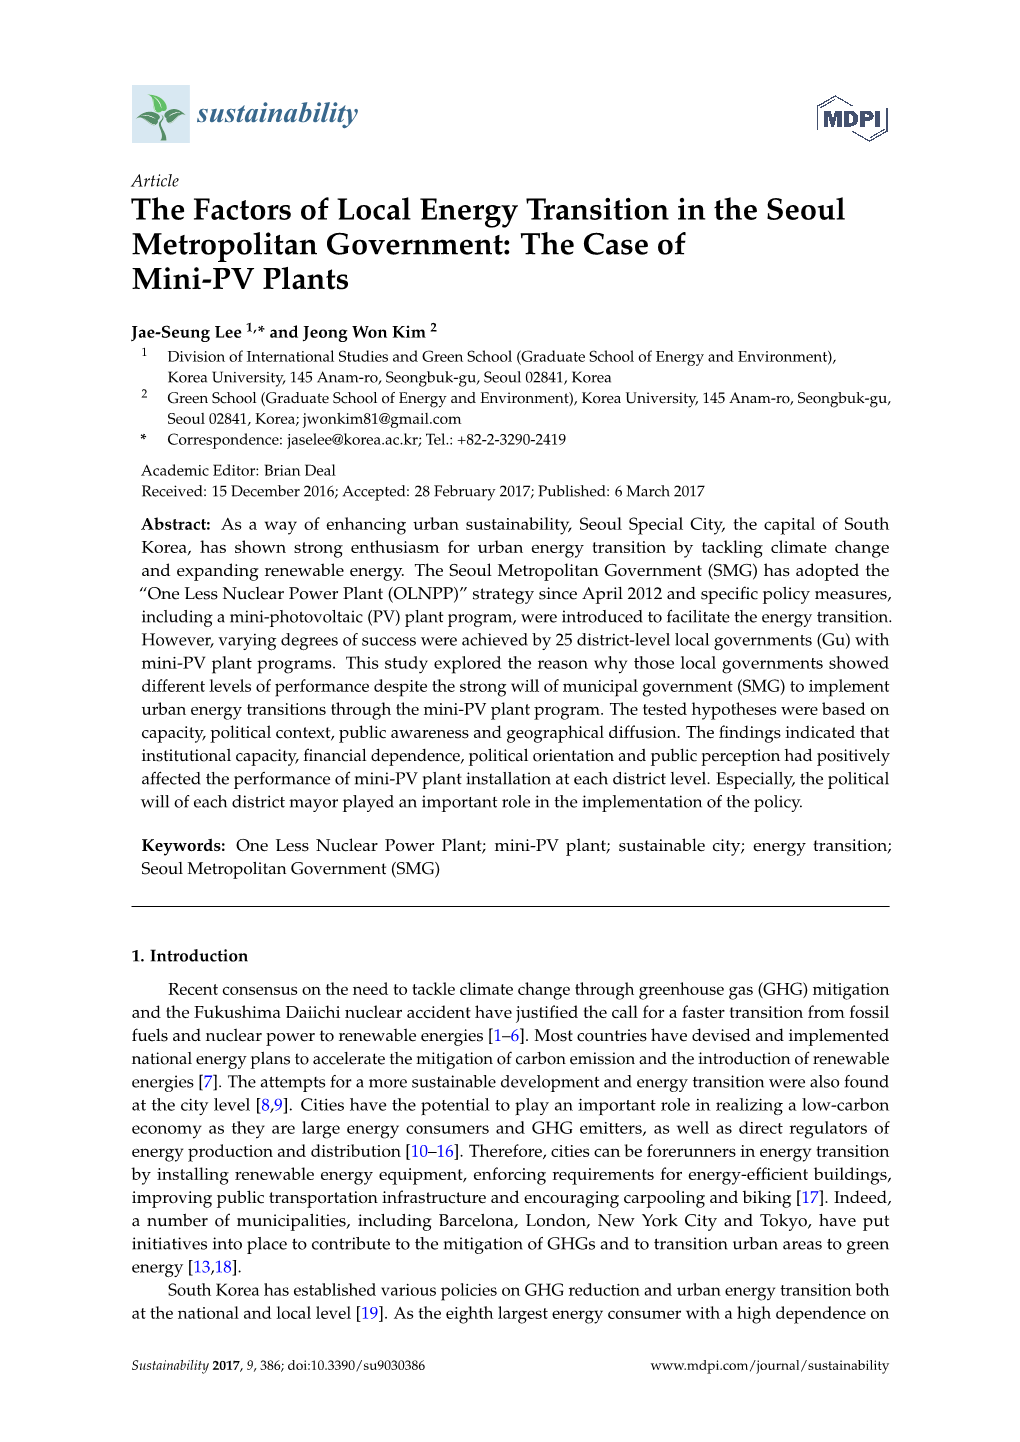 The Factors of Local Energy Transition in the Seoul Metropolitan Government: the Case of Mini-PV Plants